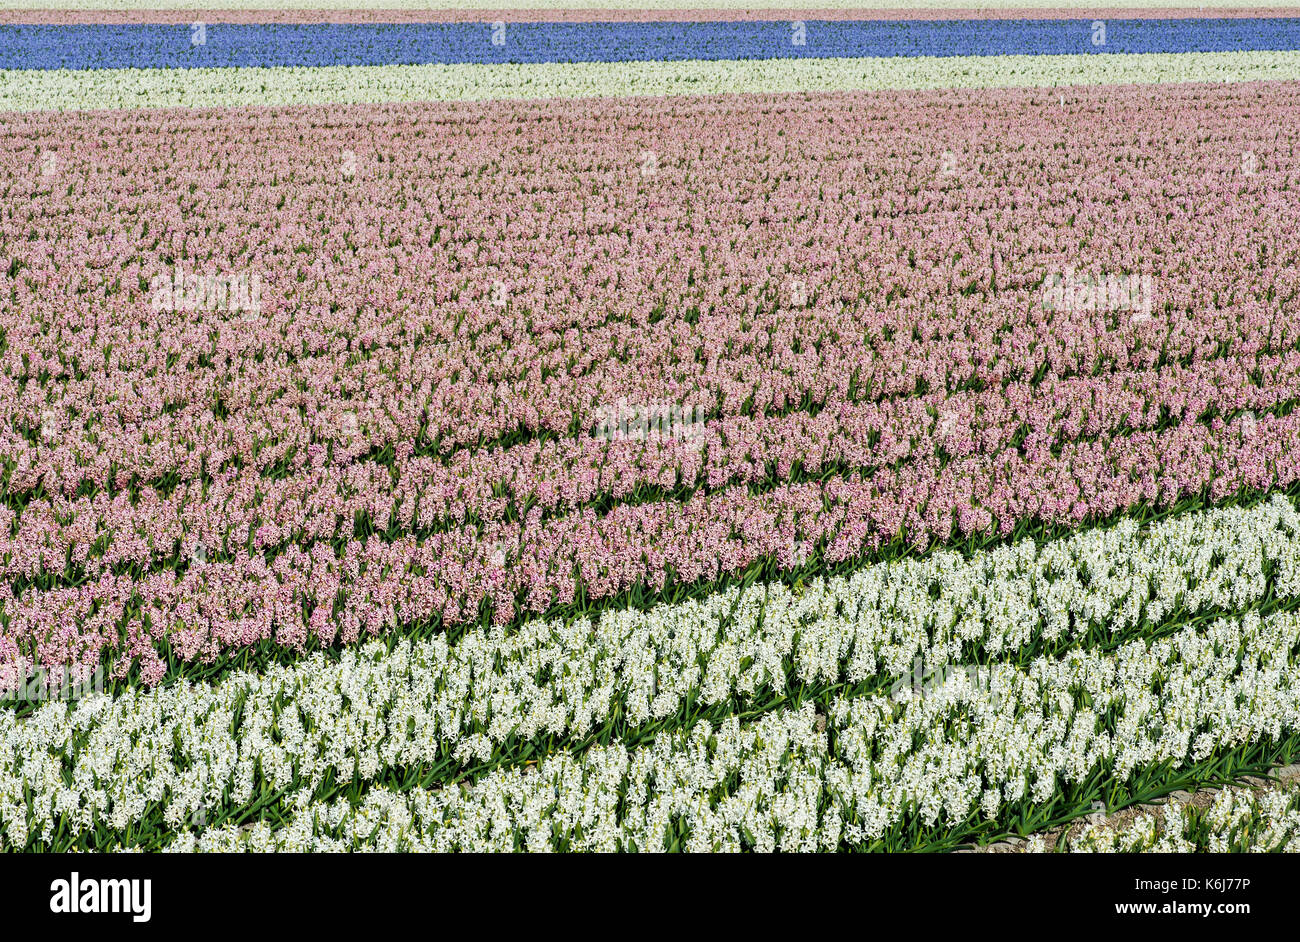 Blooming hyacinth field in the area of Bollenstreek, known for the production of spring flower bulbs,  Netherlands Stock Photo